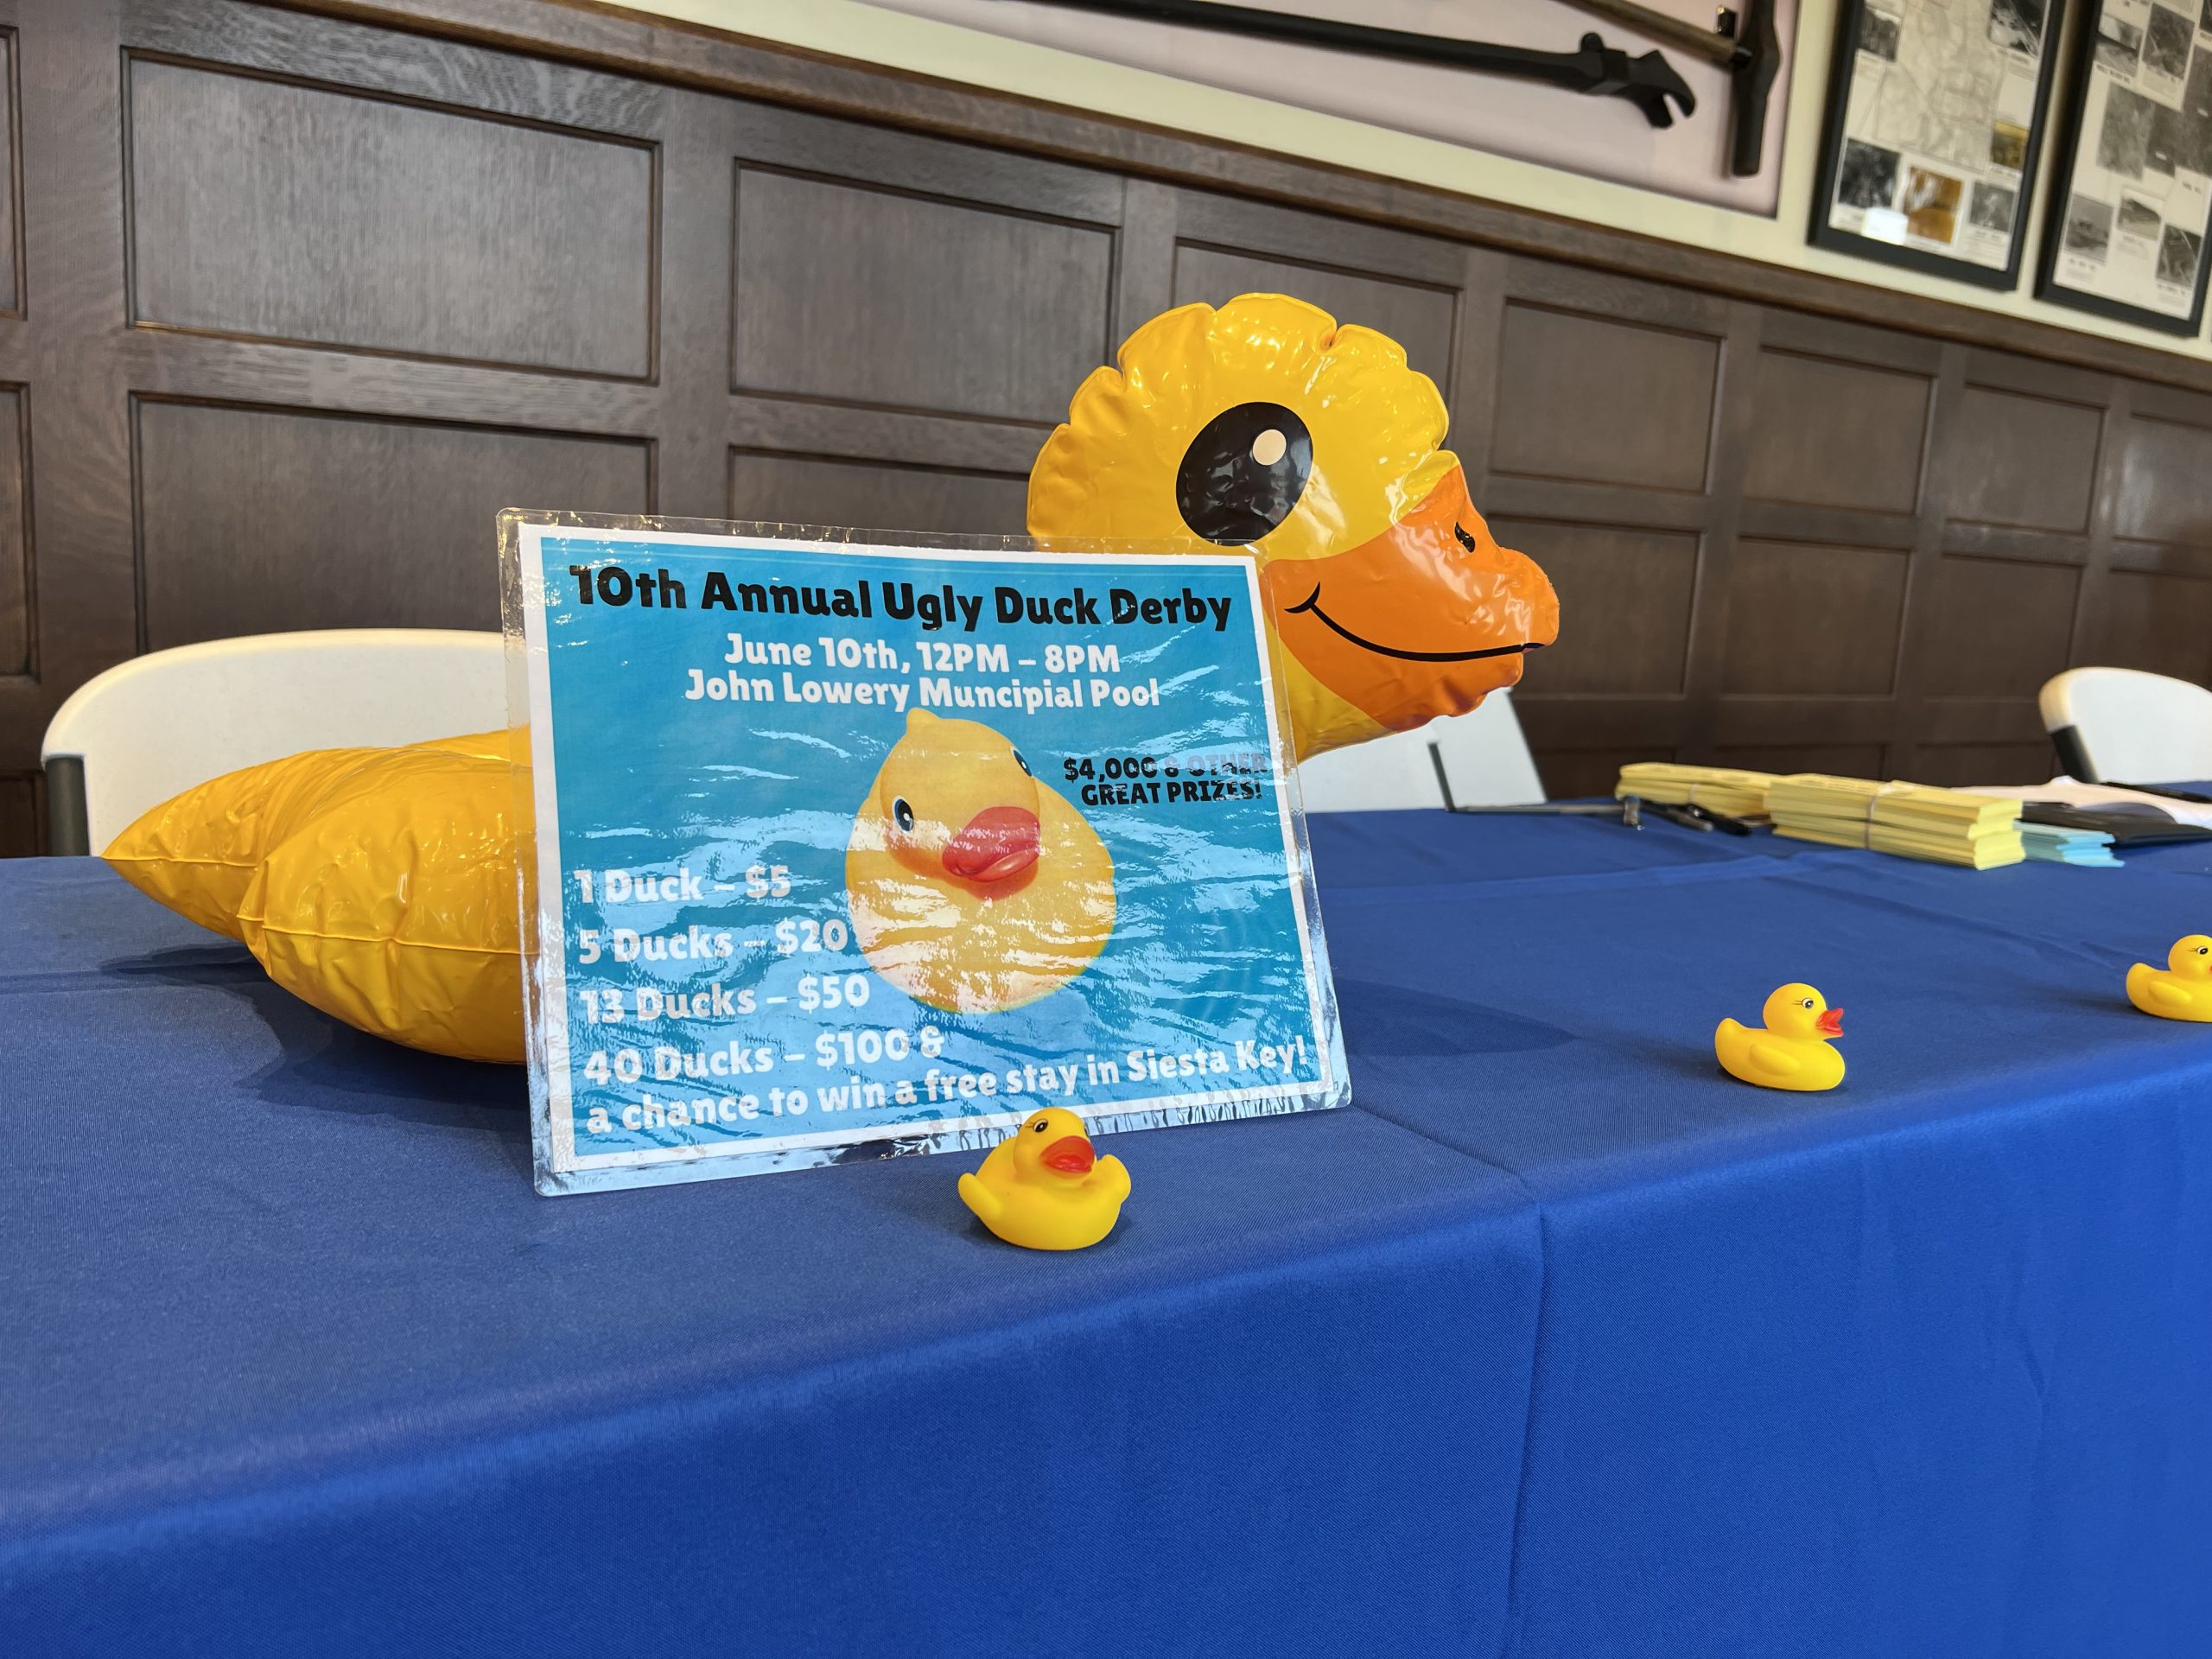 Over 6,000 tickets sold during Ugly Duck Derby Kick-Off event on Thursday